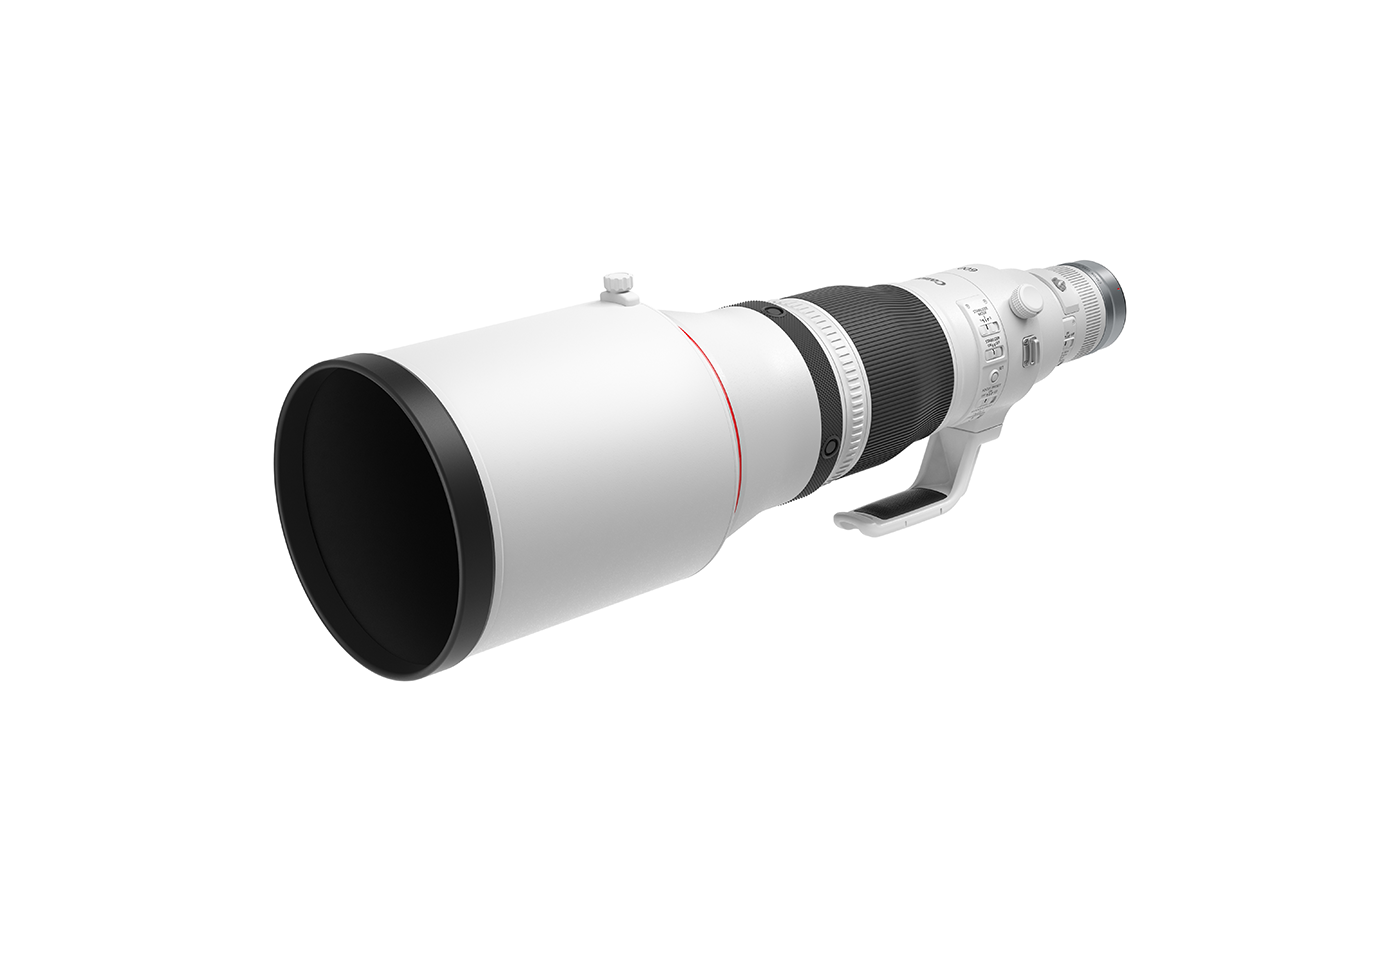 Front profile image of RF 600mm f/4 L IS USM telephoto lens with hood